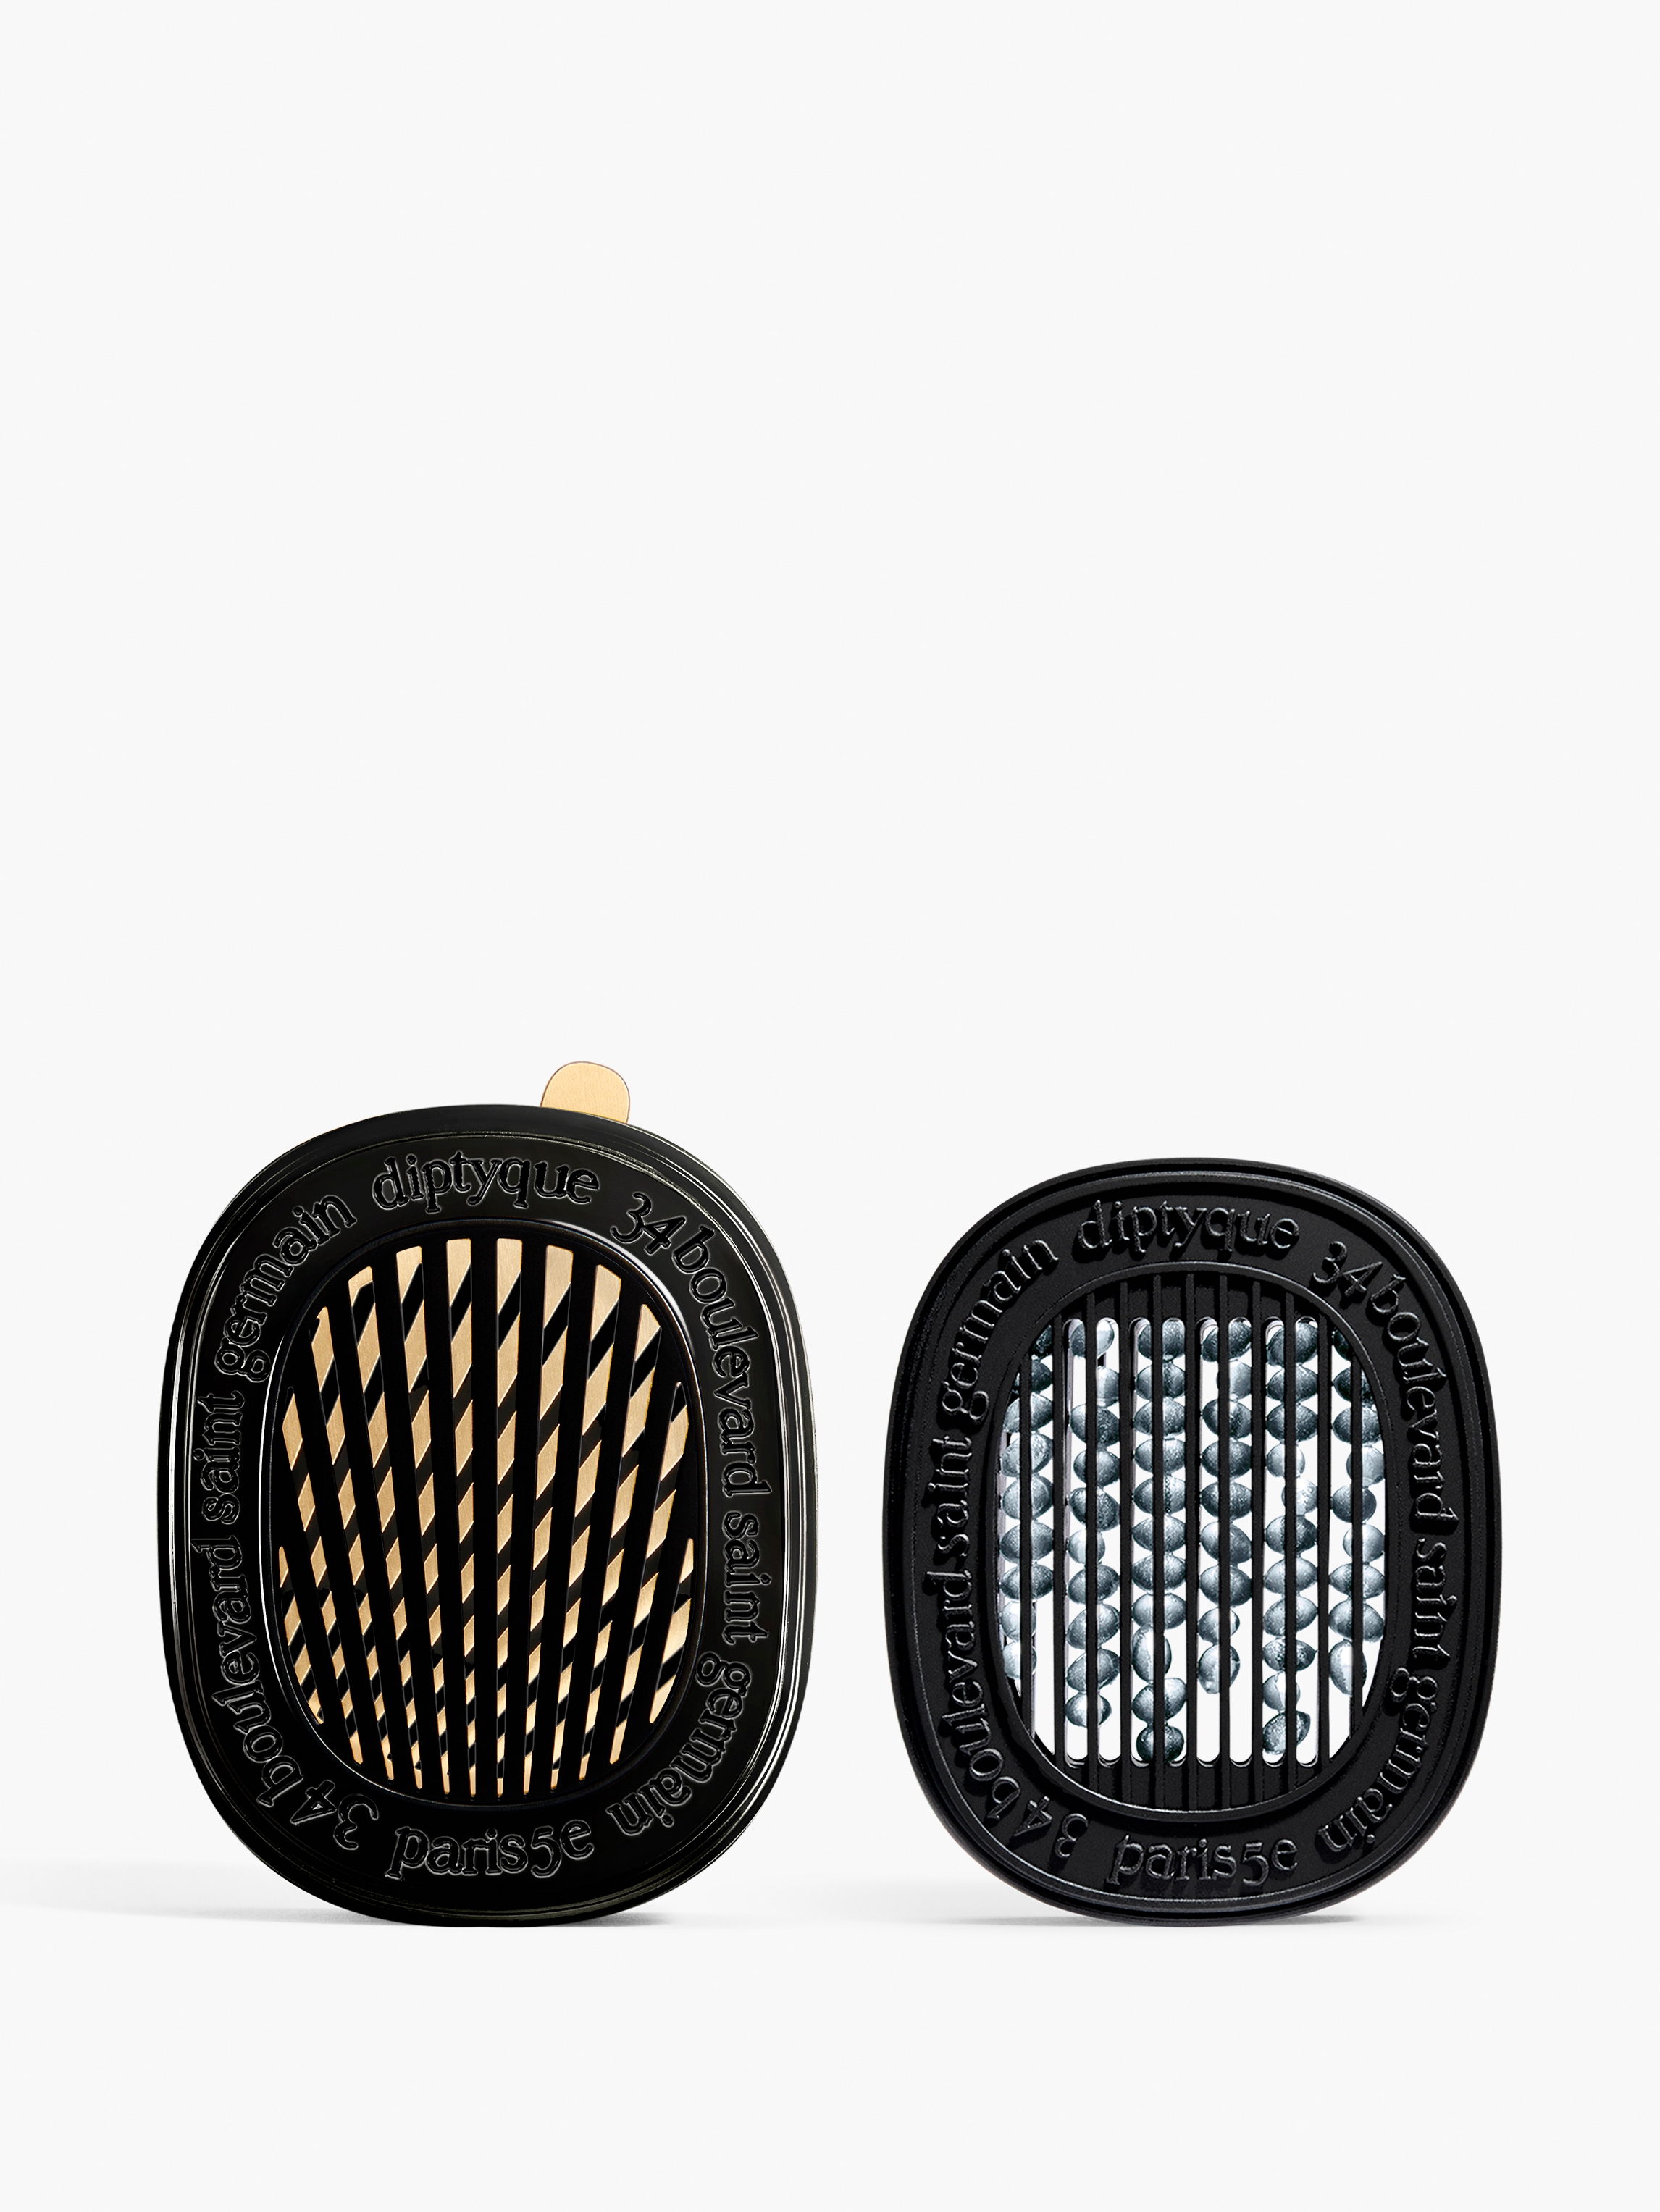 https://www.diptyqueparis.com/media/catalog/product/d/i/diptyque-car-diffuser-with-baies-insert-cardifb-2.jpg?quality=100&bg-color=255,255,255&fit=bounds&height=&width=